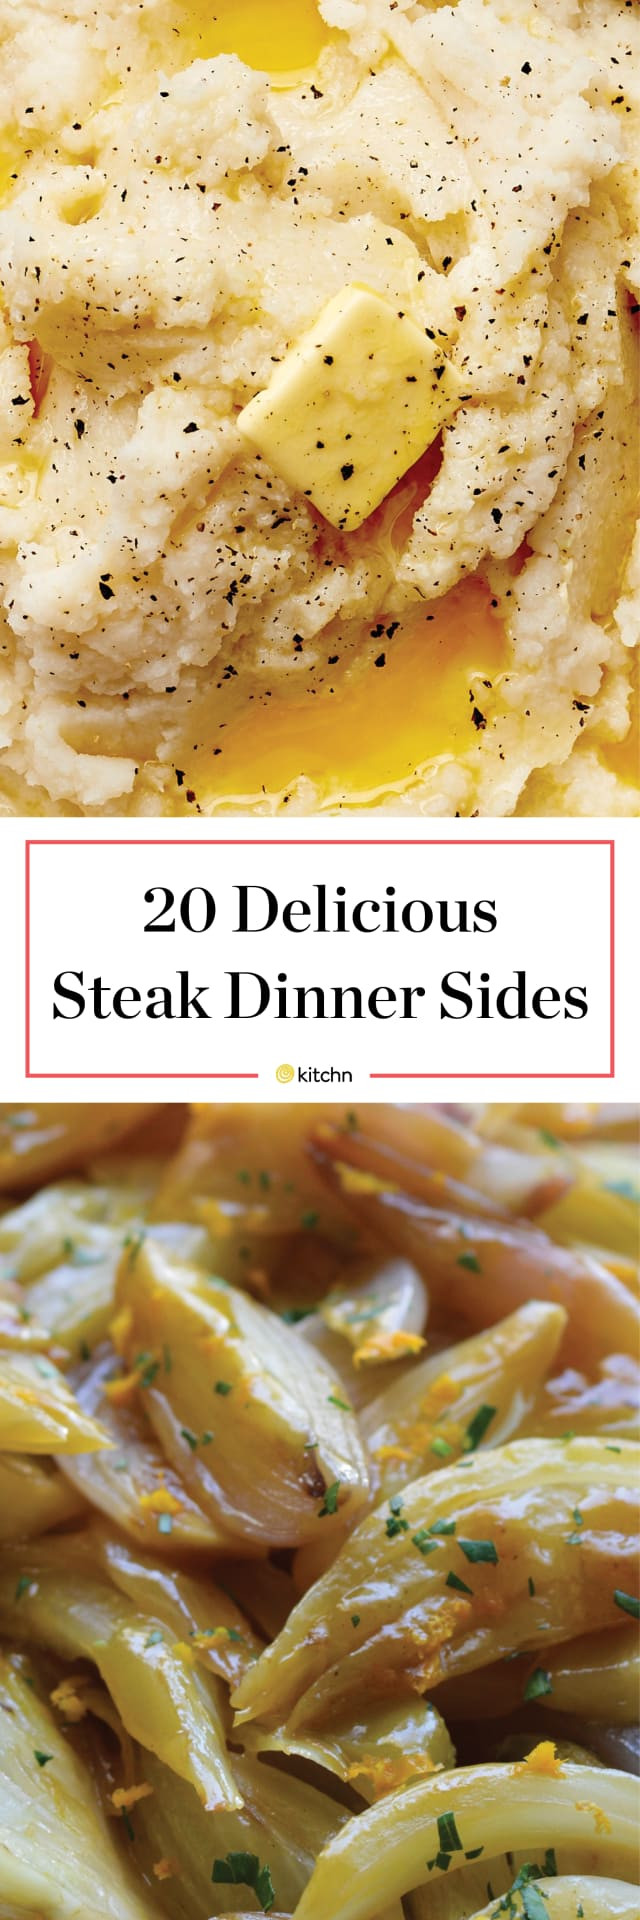 Side Dishes To Go With Steak
 Side Dishes to Serve Alongside a Juicy Steak